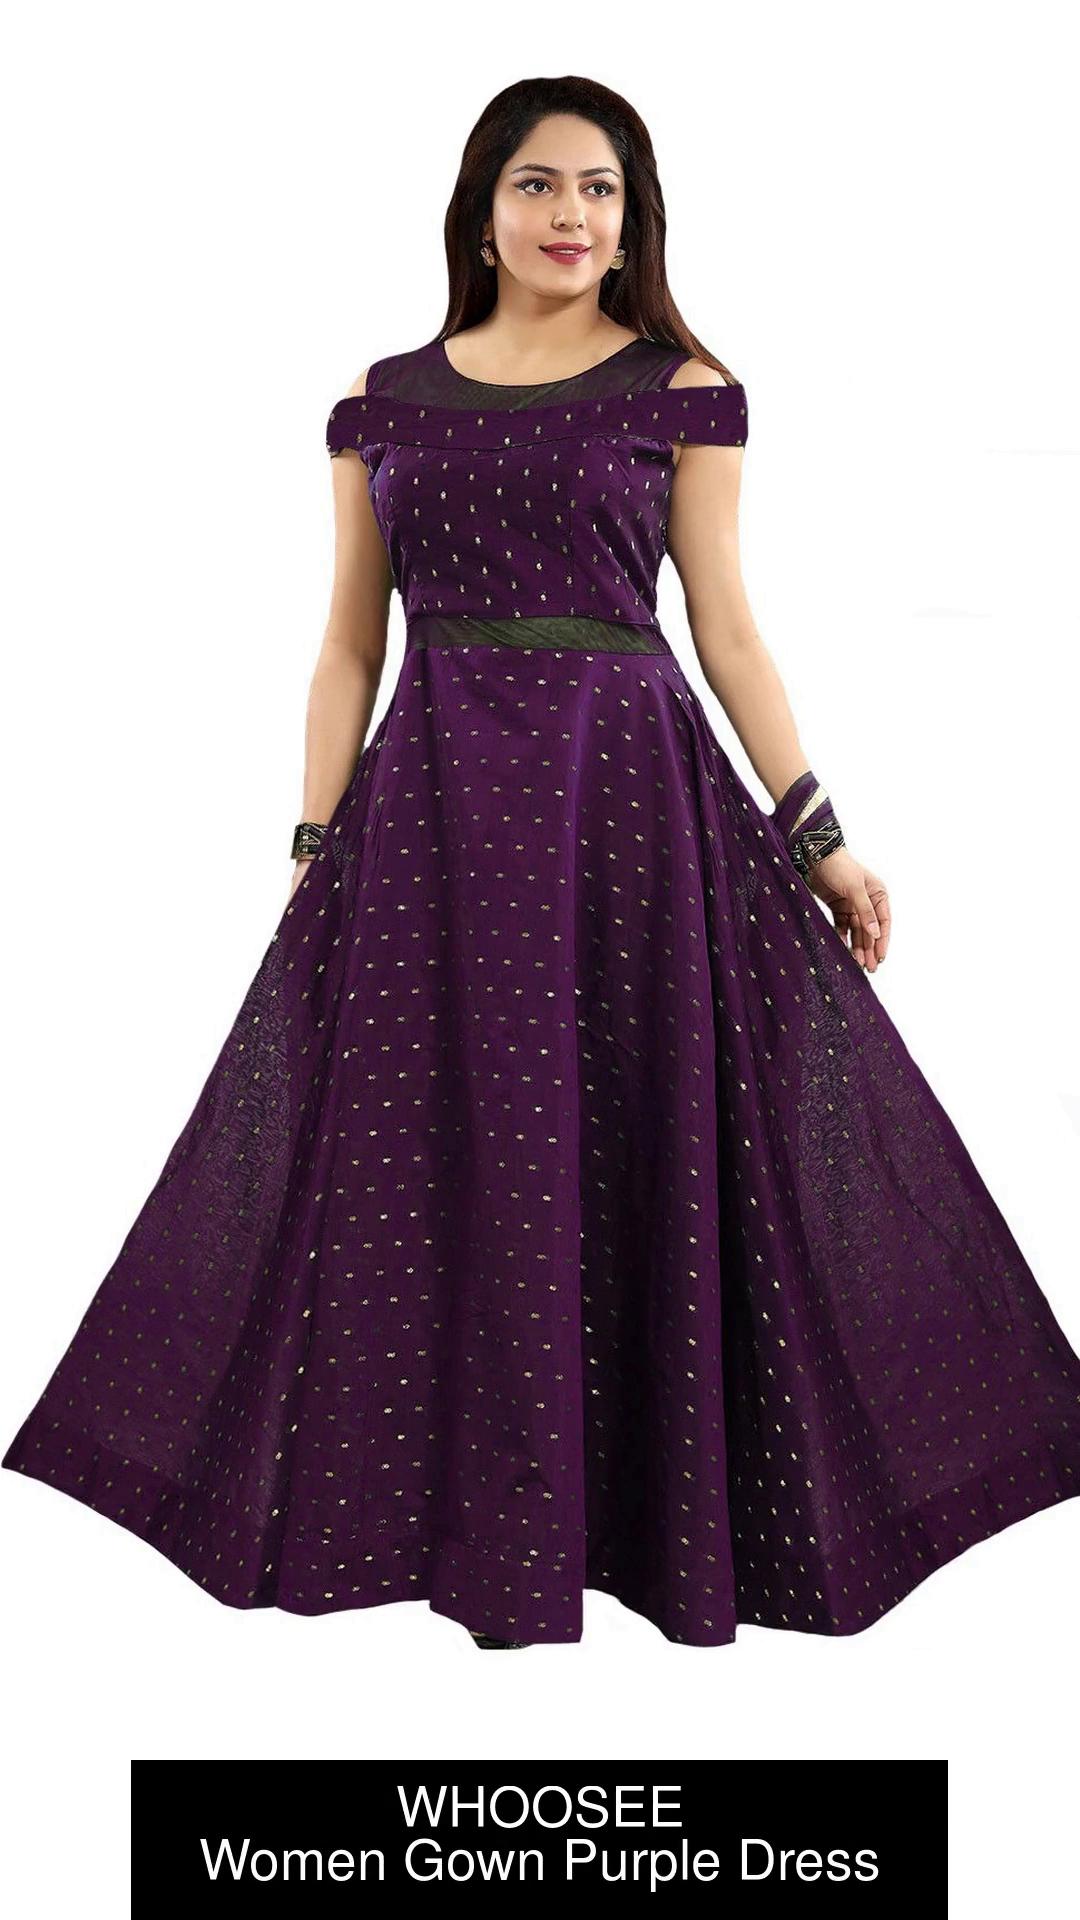 Wholesale Ladies Gown Dress,Ladies Gown Dress Manufacturer & Supplier from  Surat India